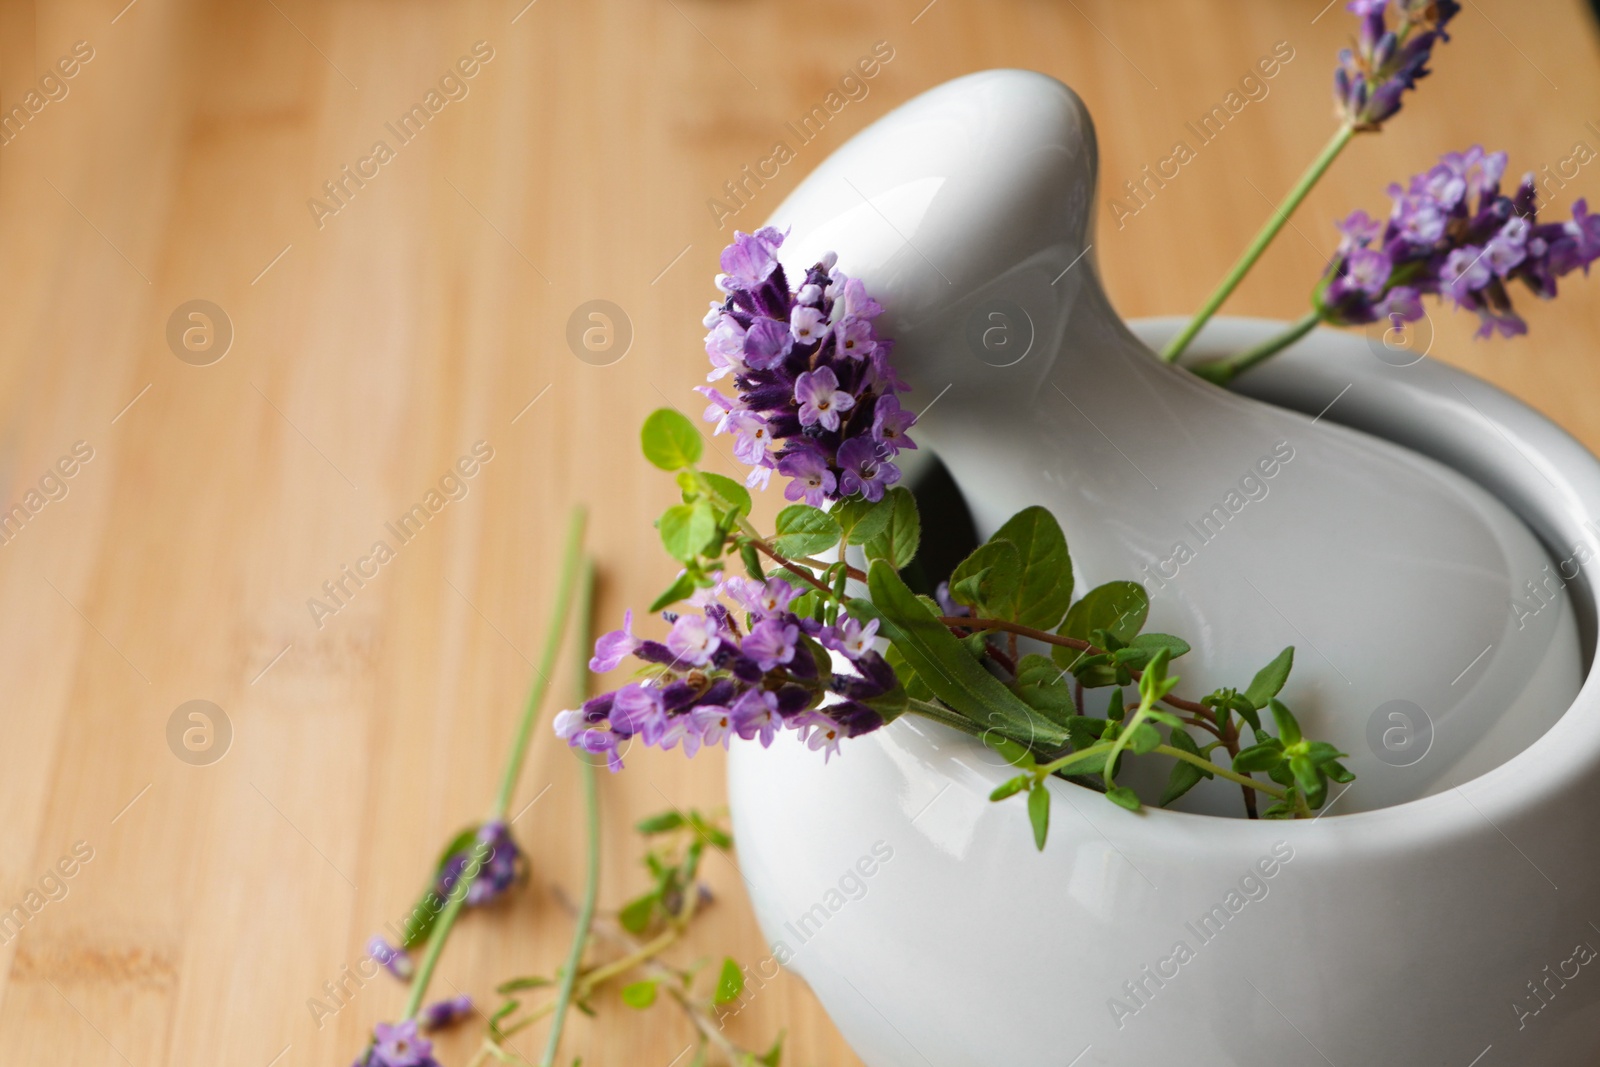 Photo of Mortar with fresh lavender flowers, green twigs and pestle on table, closeup. Space for text